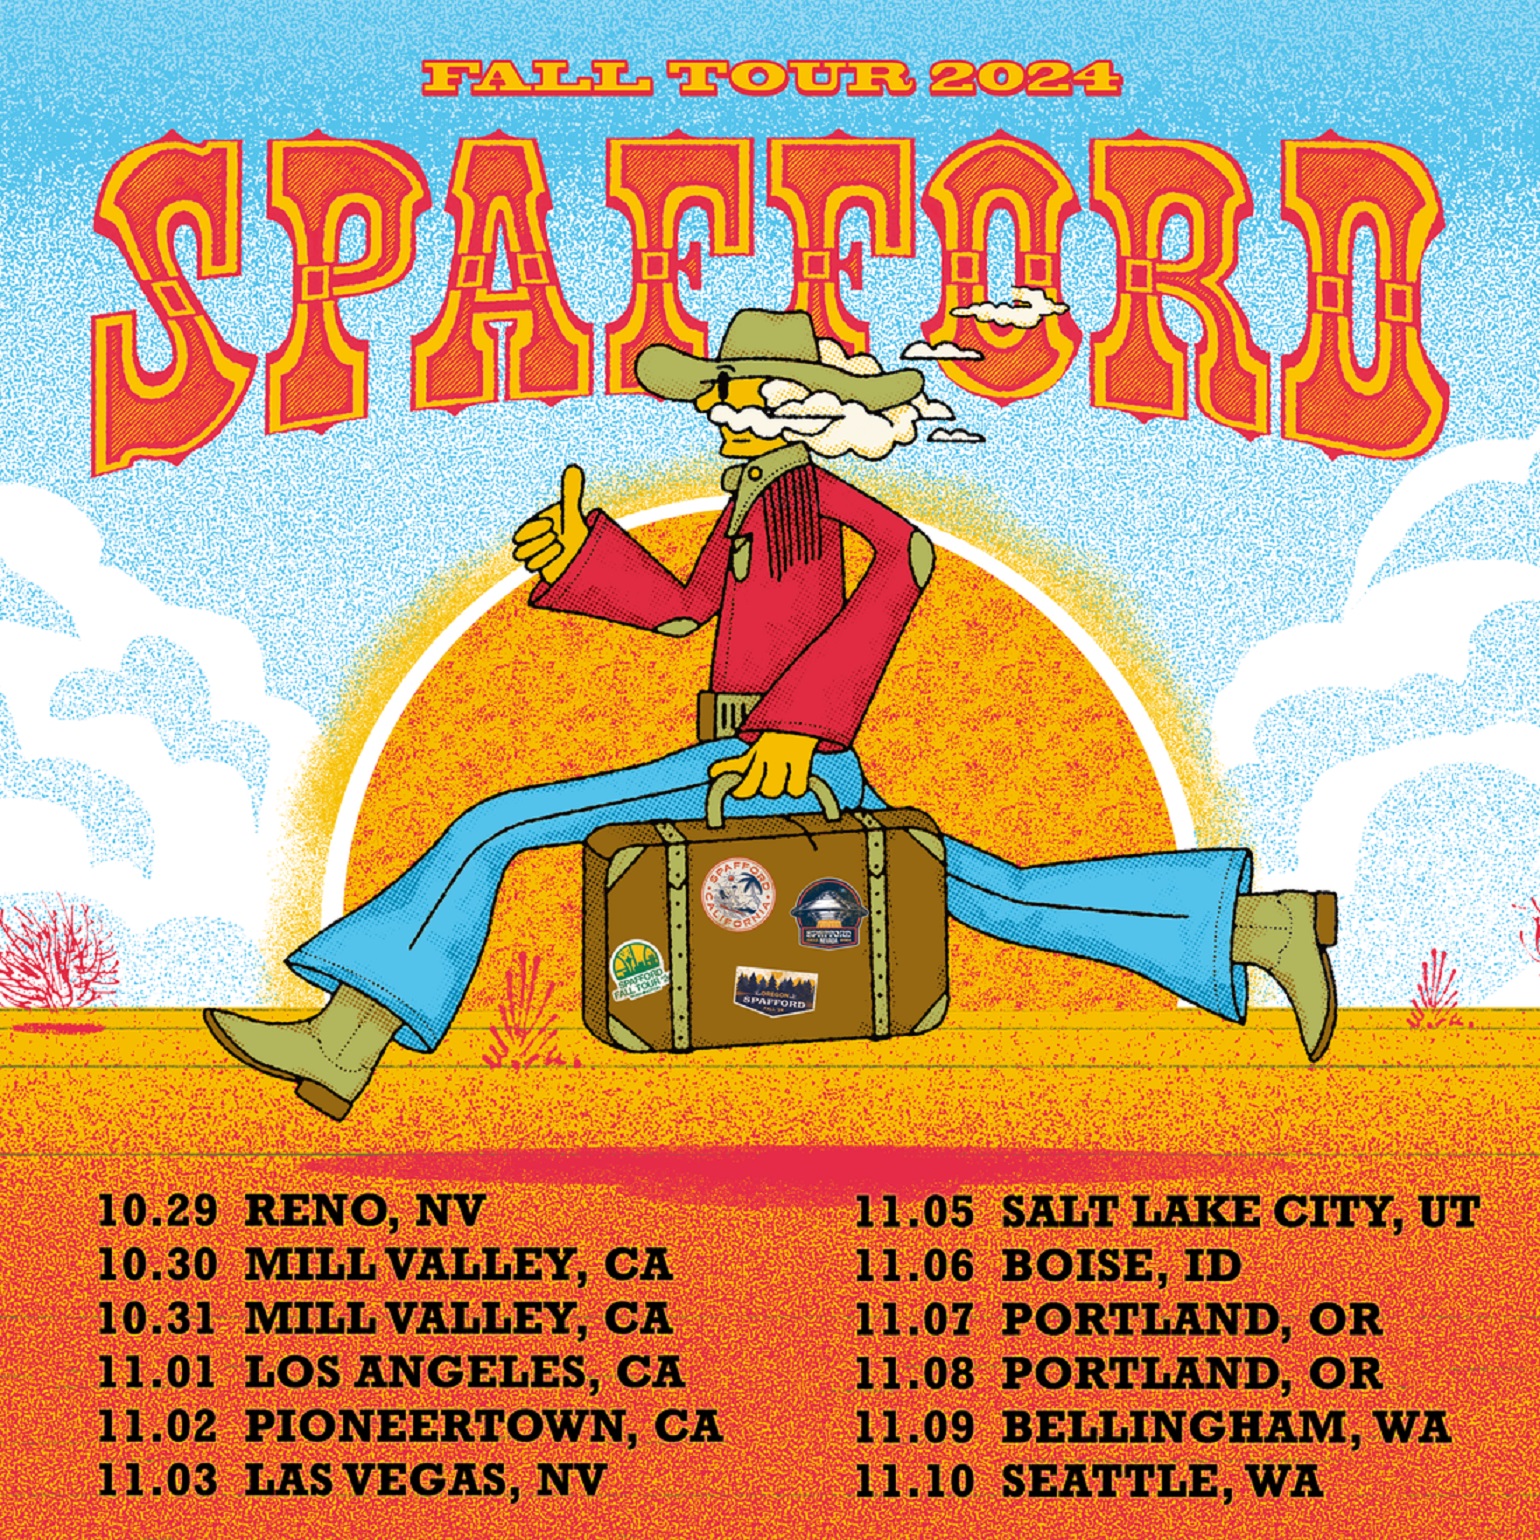 Spafford Covers the Beatles "Come Together"